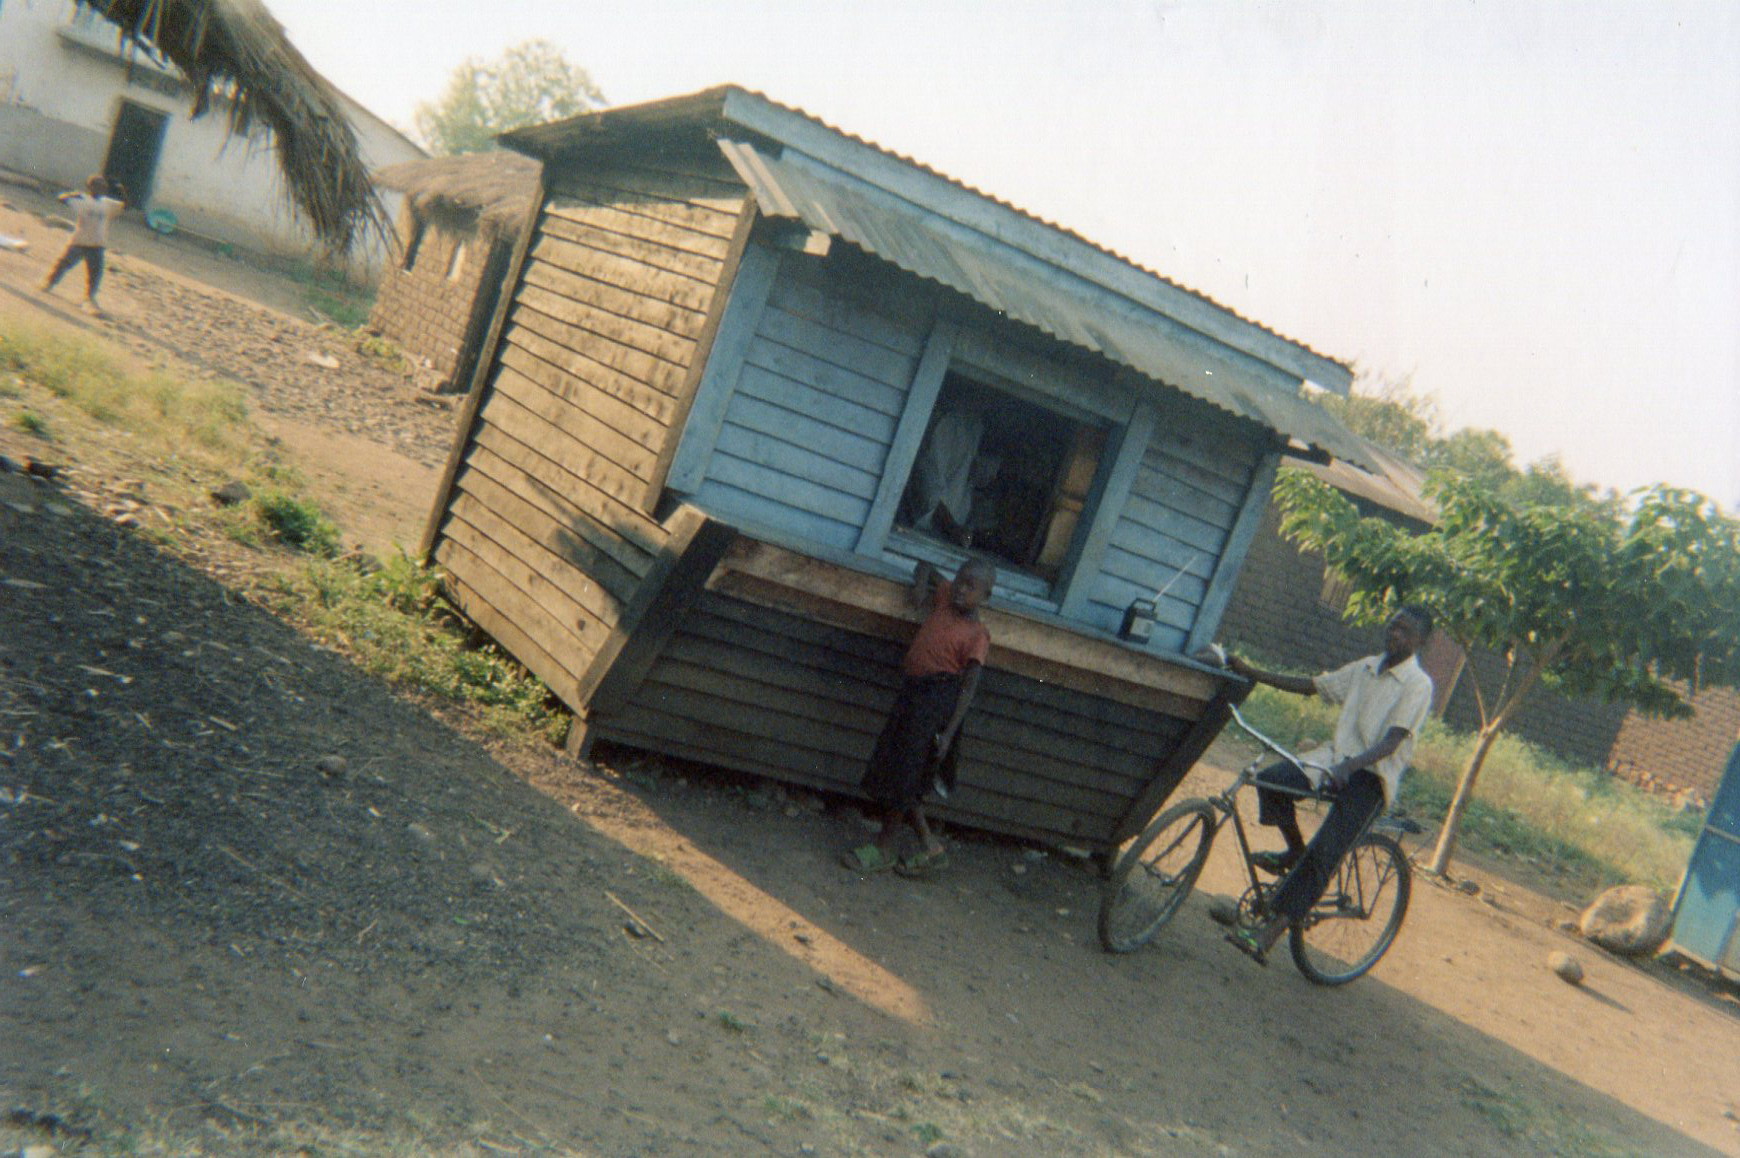  This photo shows the kiosk where I buy training materials for ex-combatants and other community members. 